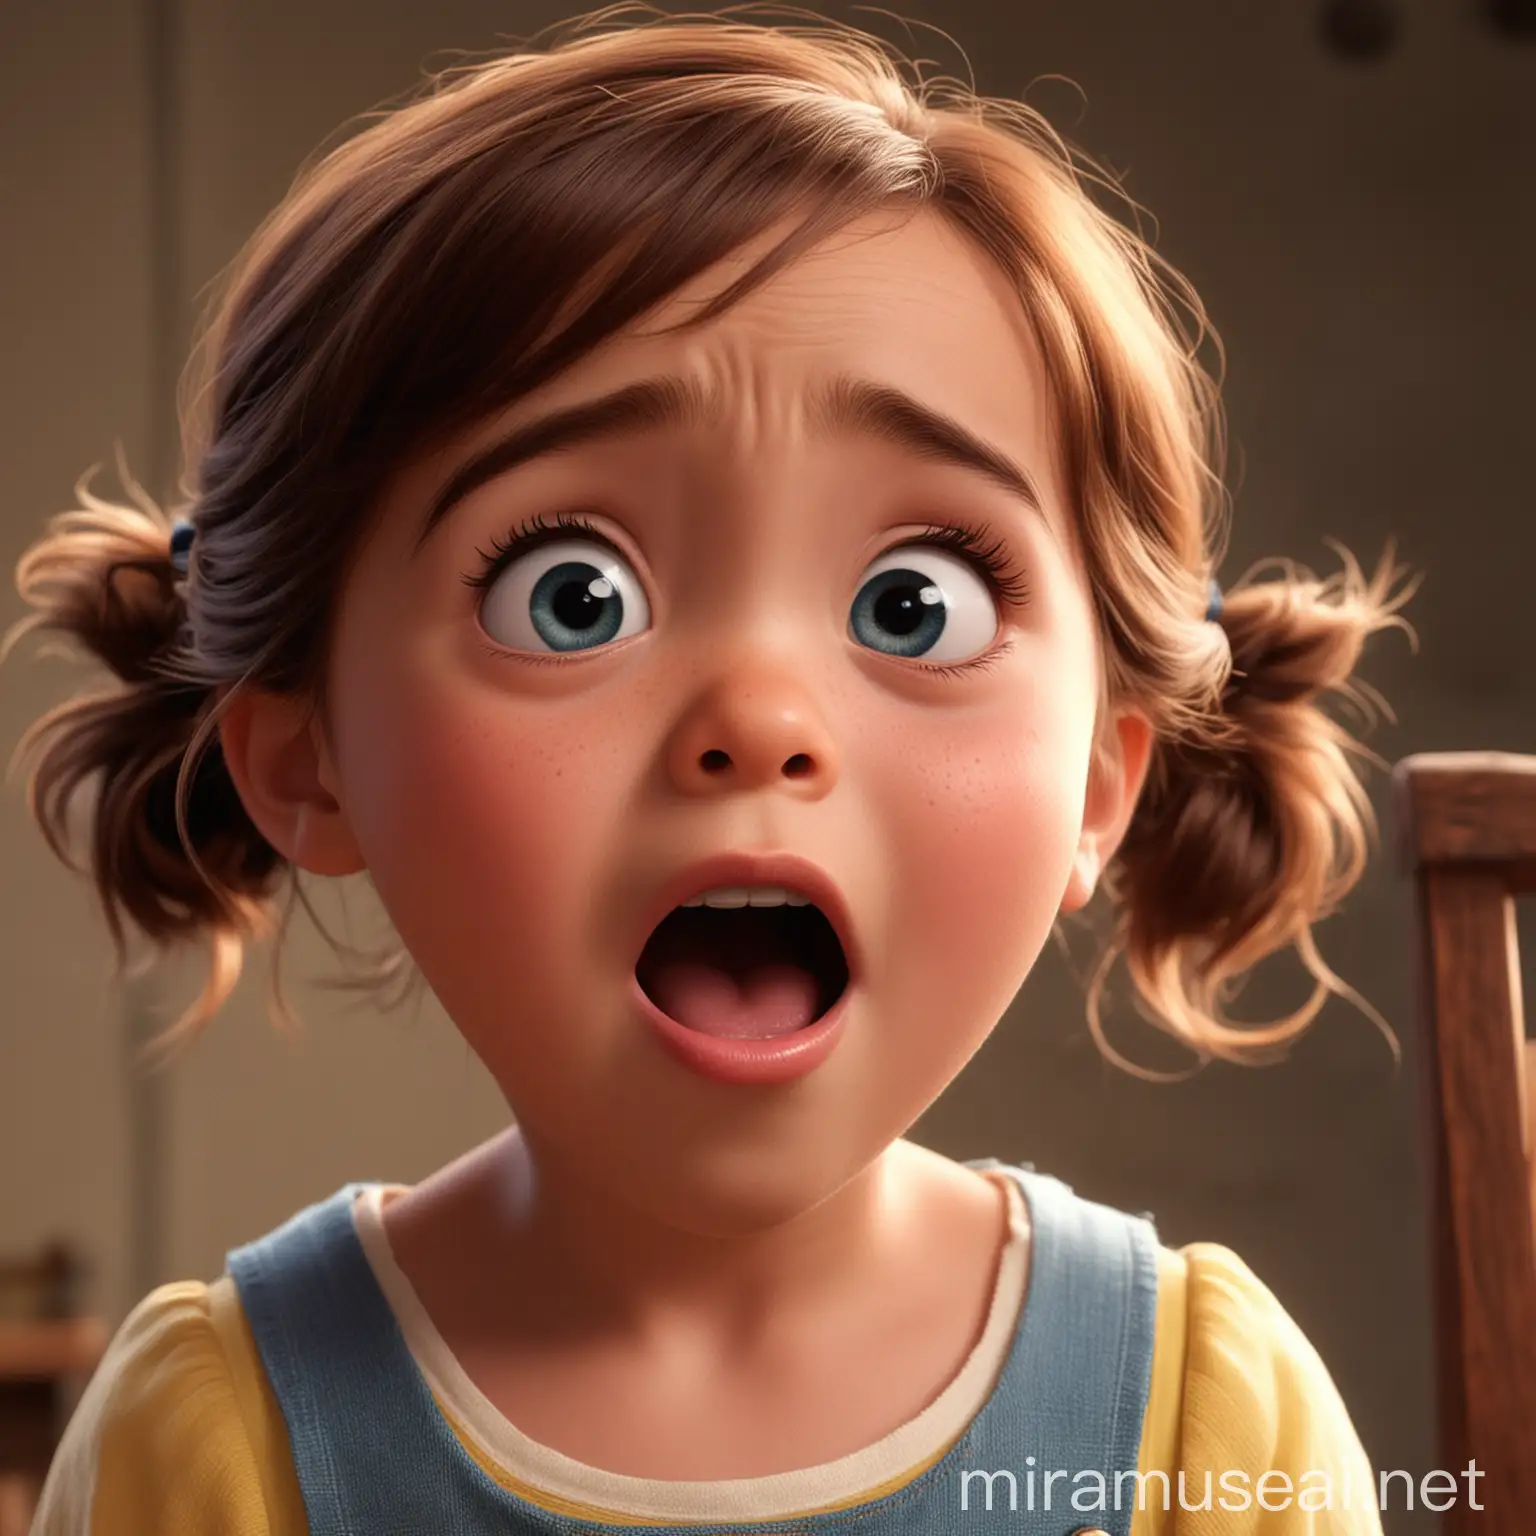 A little girl made a surprised expression,disney pixar style